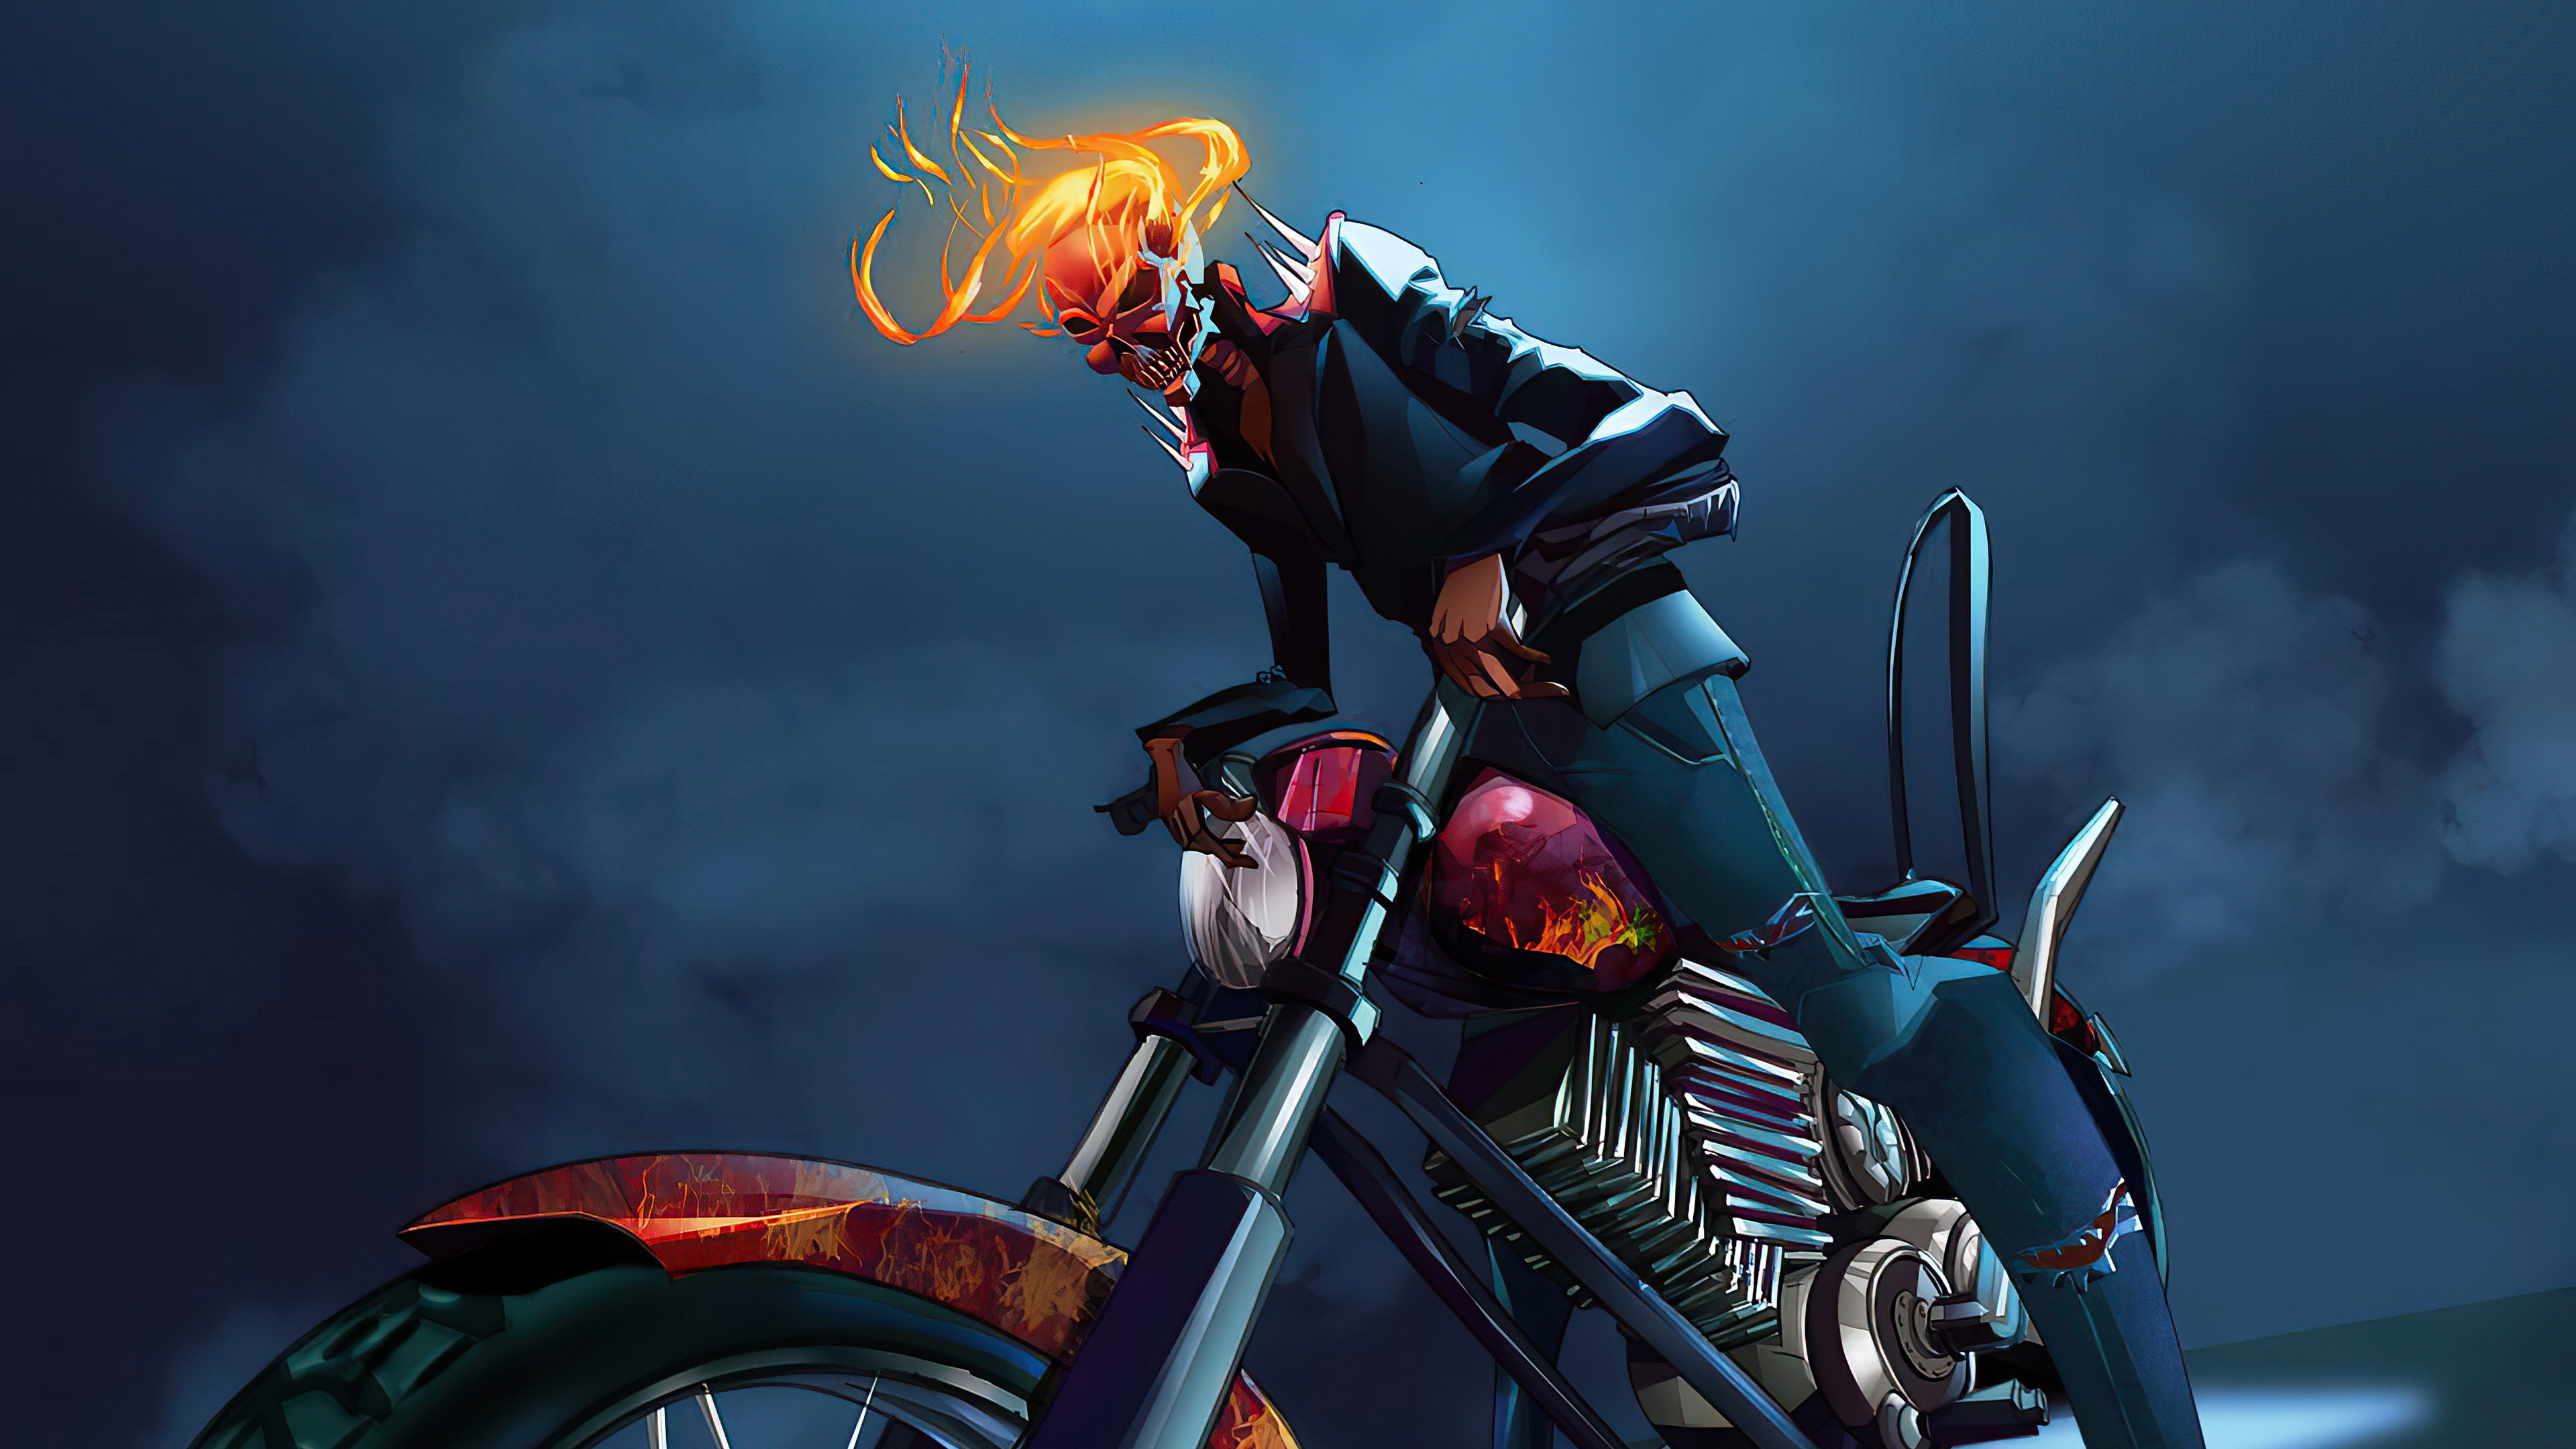 3840x Ghost Rider Cool Illustration 3840x Resolution Wallpaper Hd Superheroes 4k Wallpapers Images Photos And Background Wallpapers Den